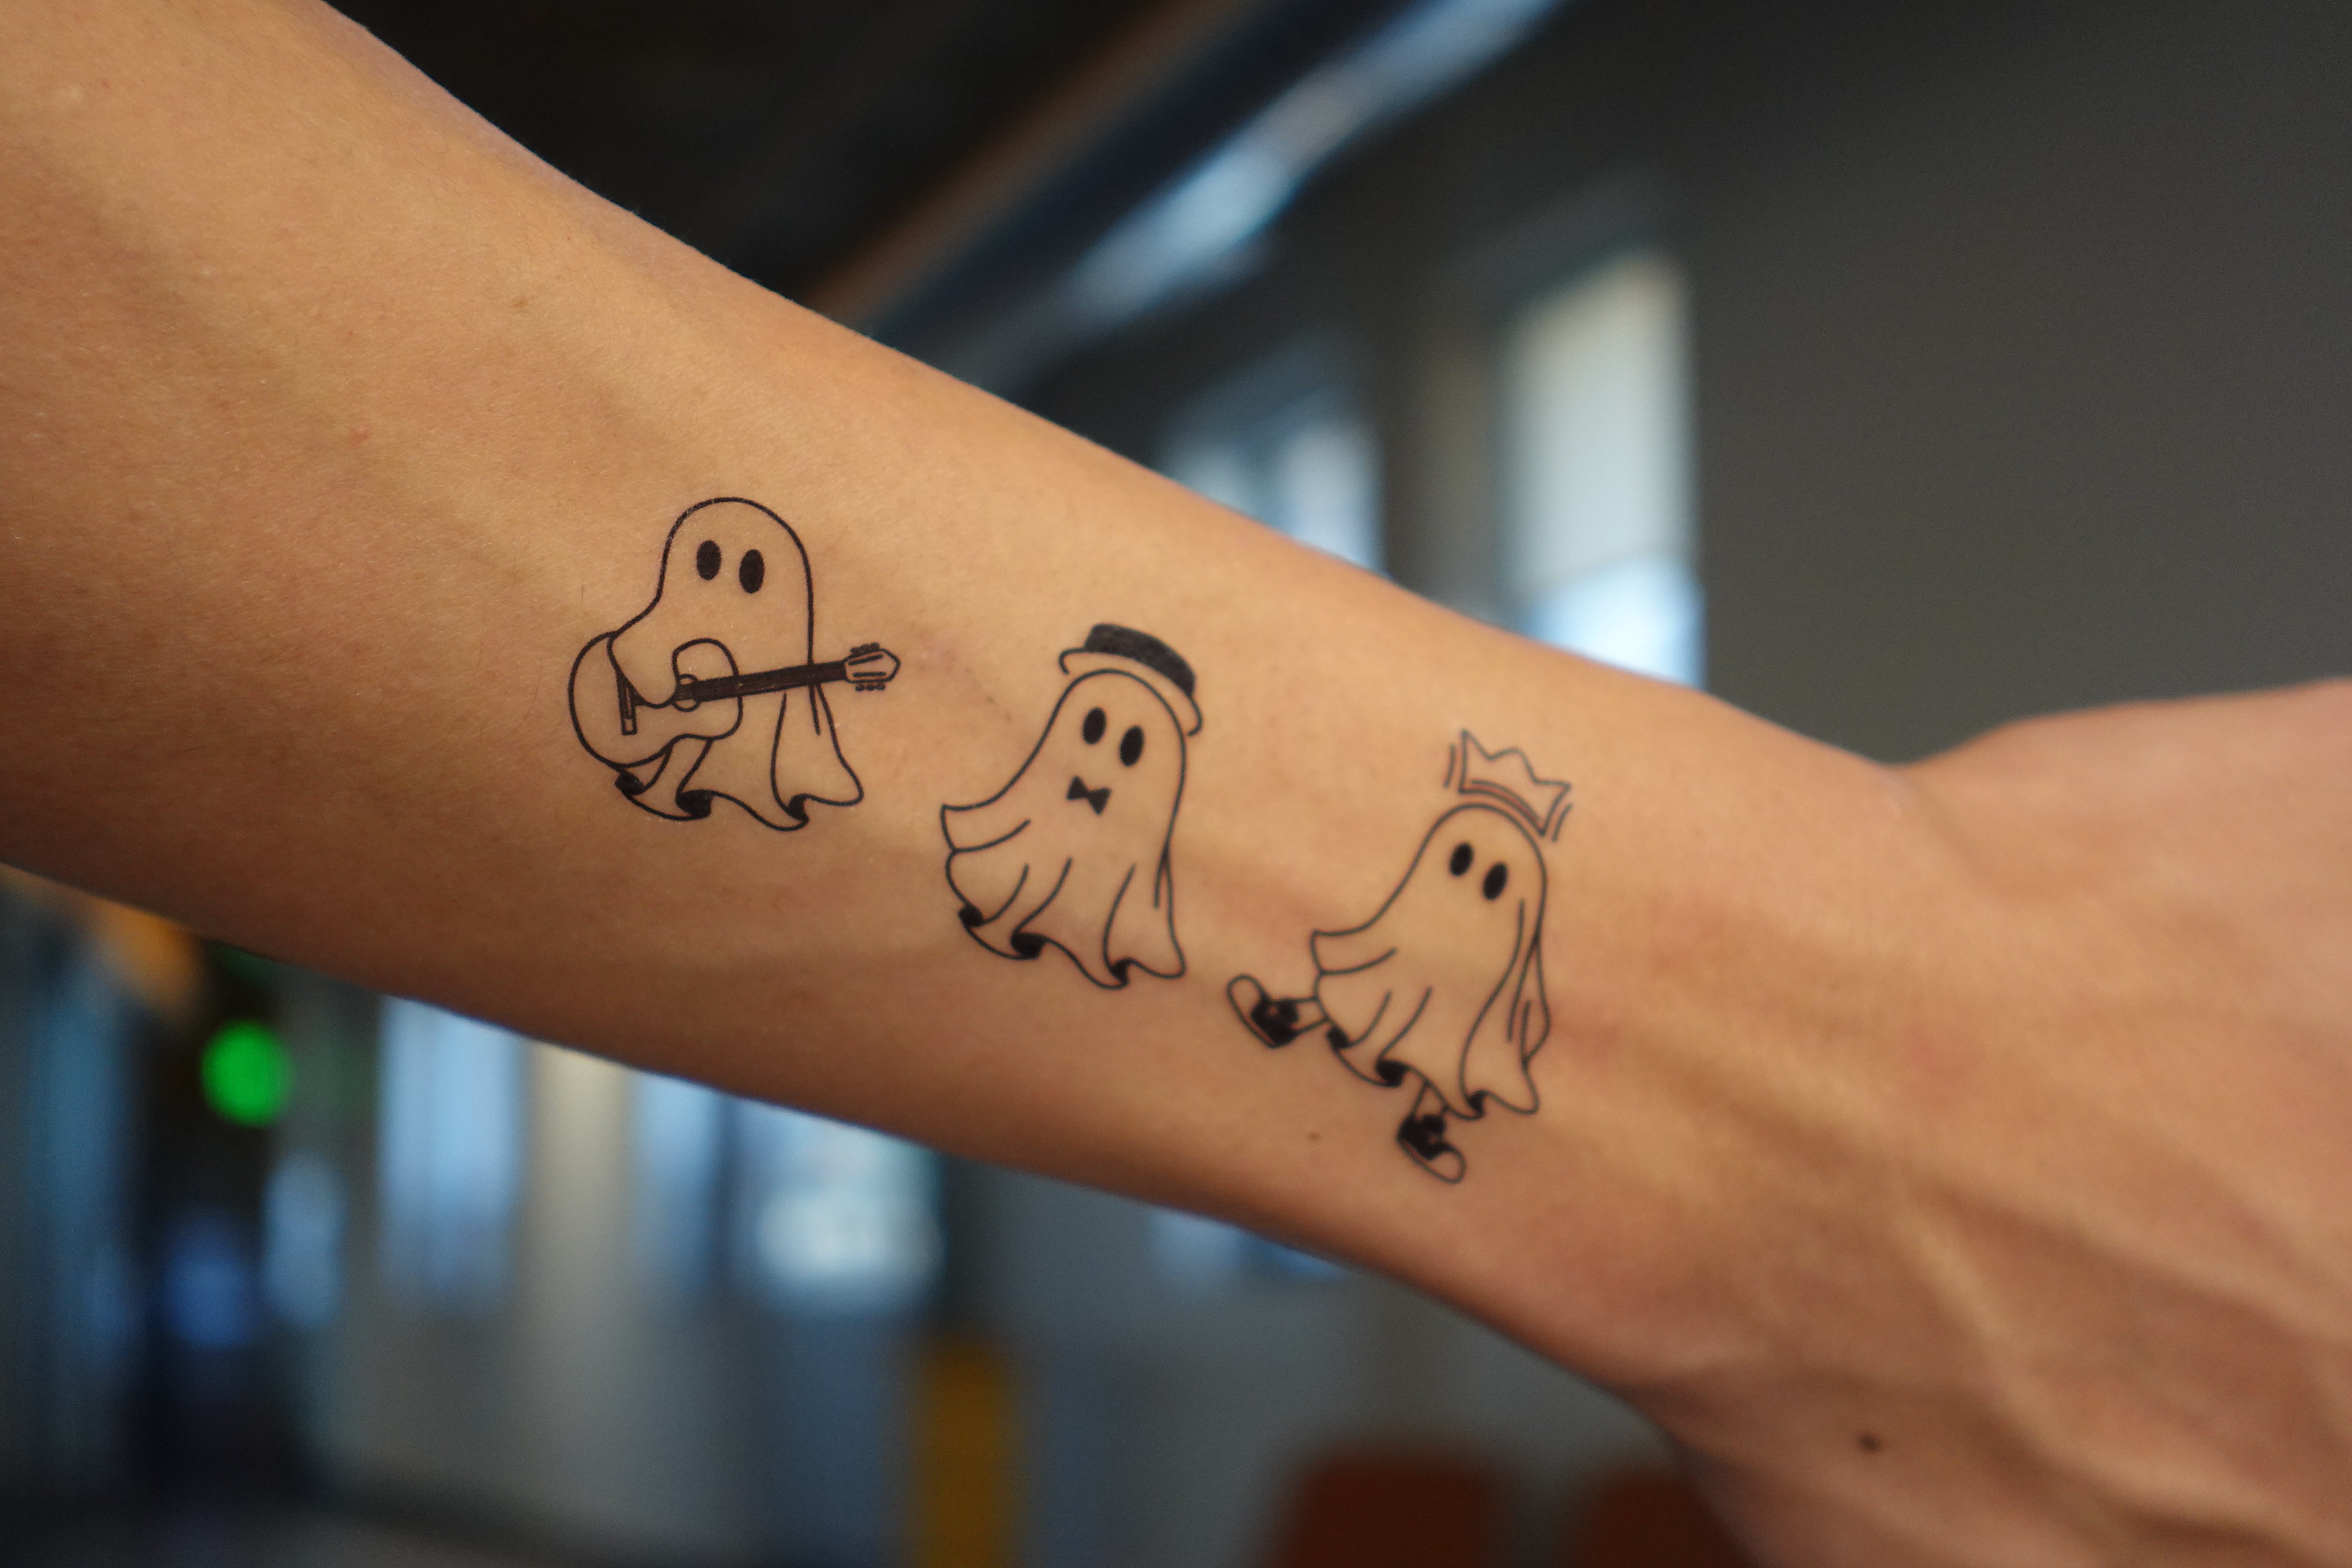 5 Spooky Tattoos To Get You in the Halloween Spirit  Spooky tattoos  Minimalist tattoo Ghost tattoo